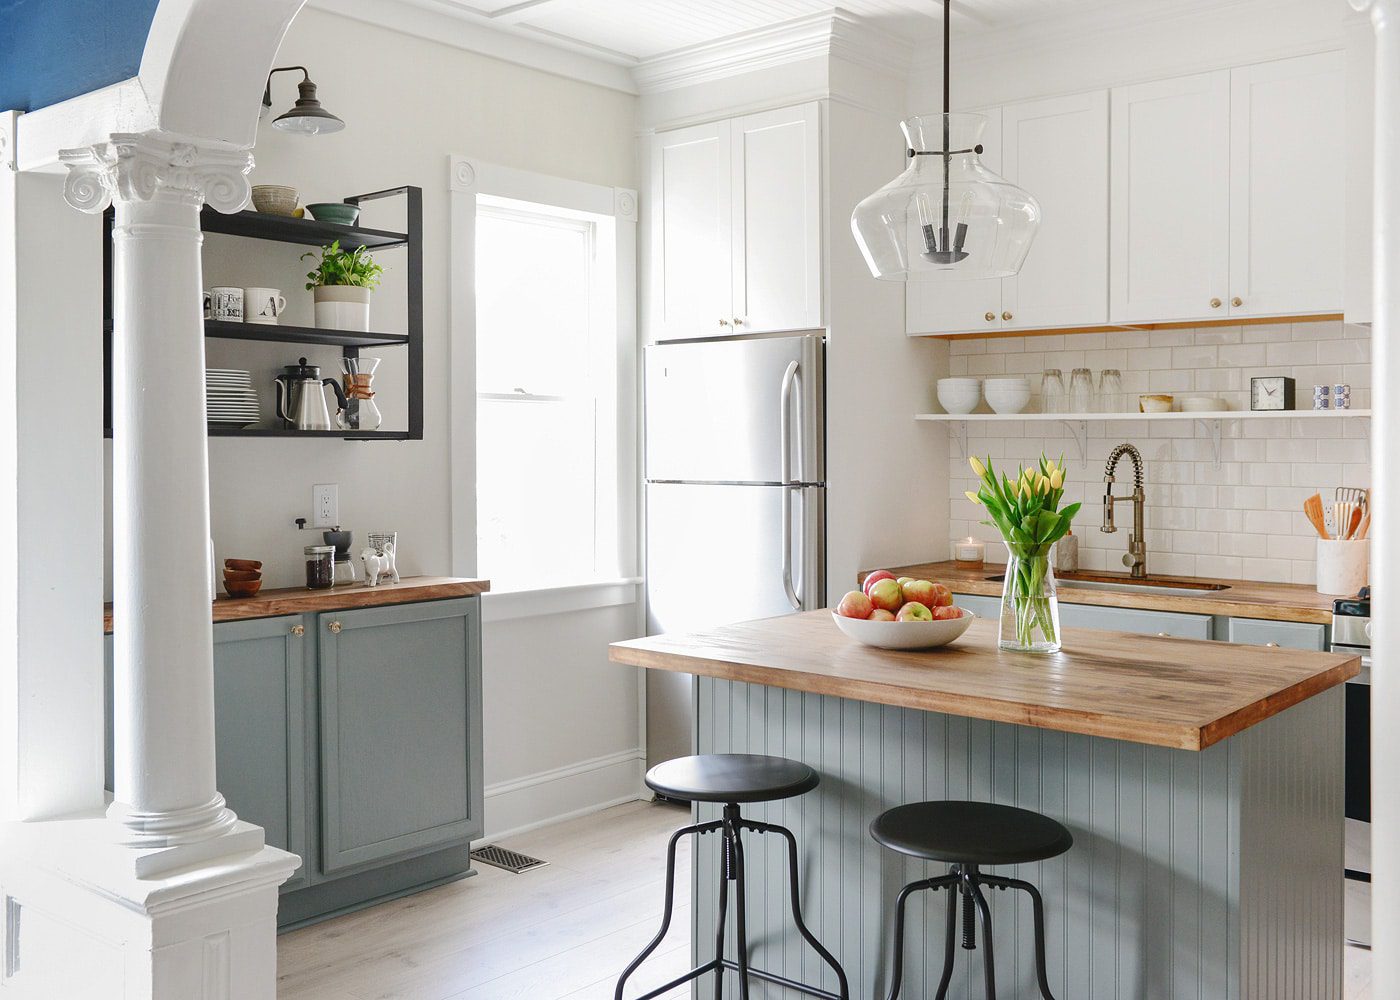 Lowe’s Kitchen Makeover: Baltimore Edition!